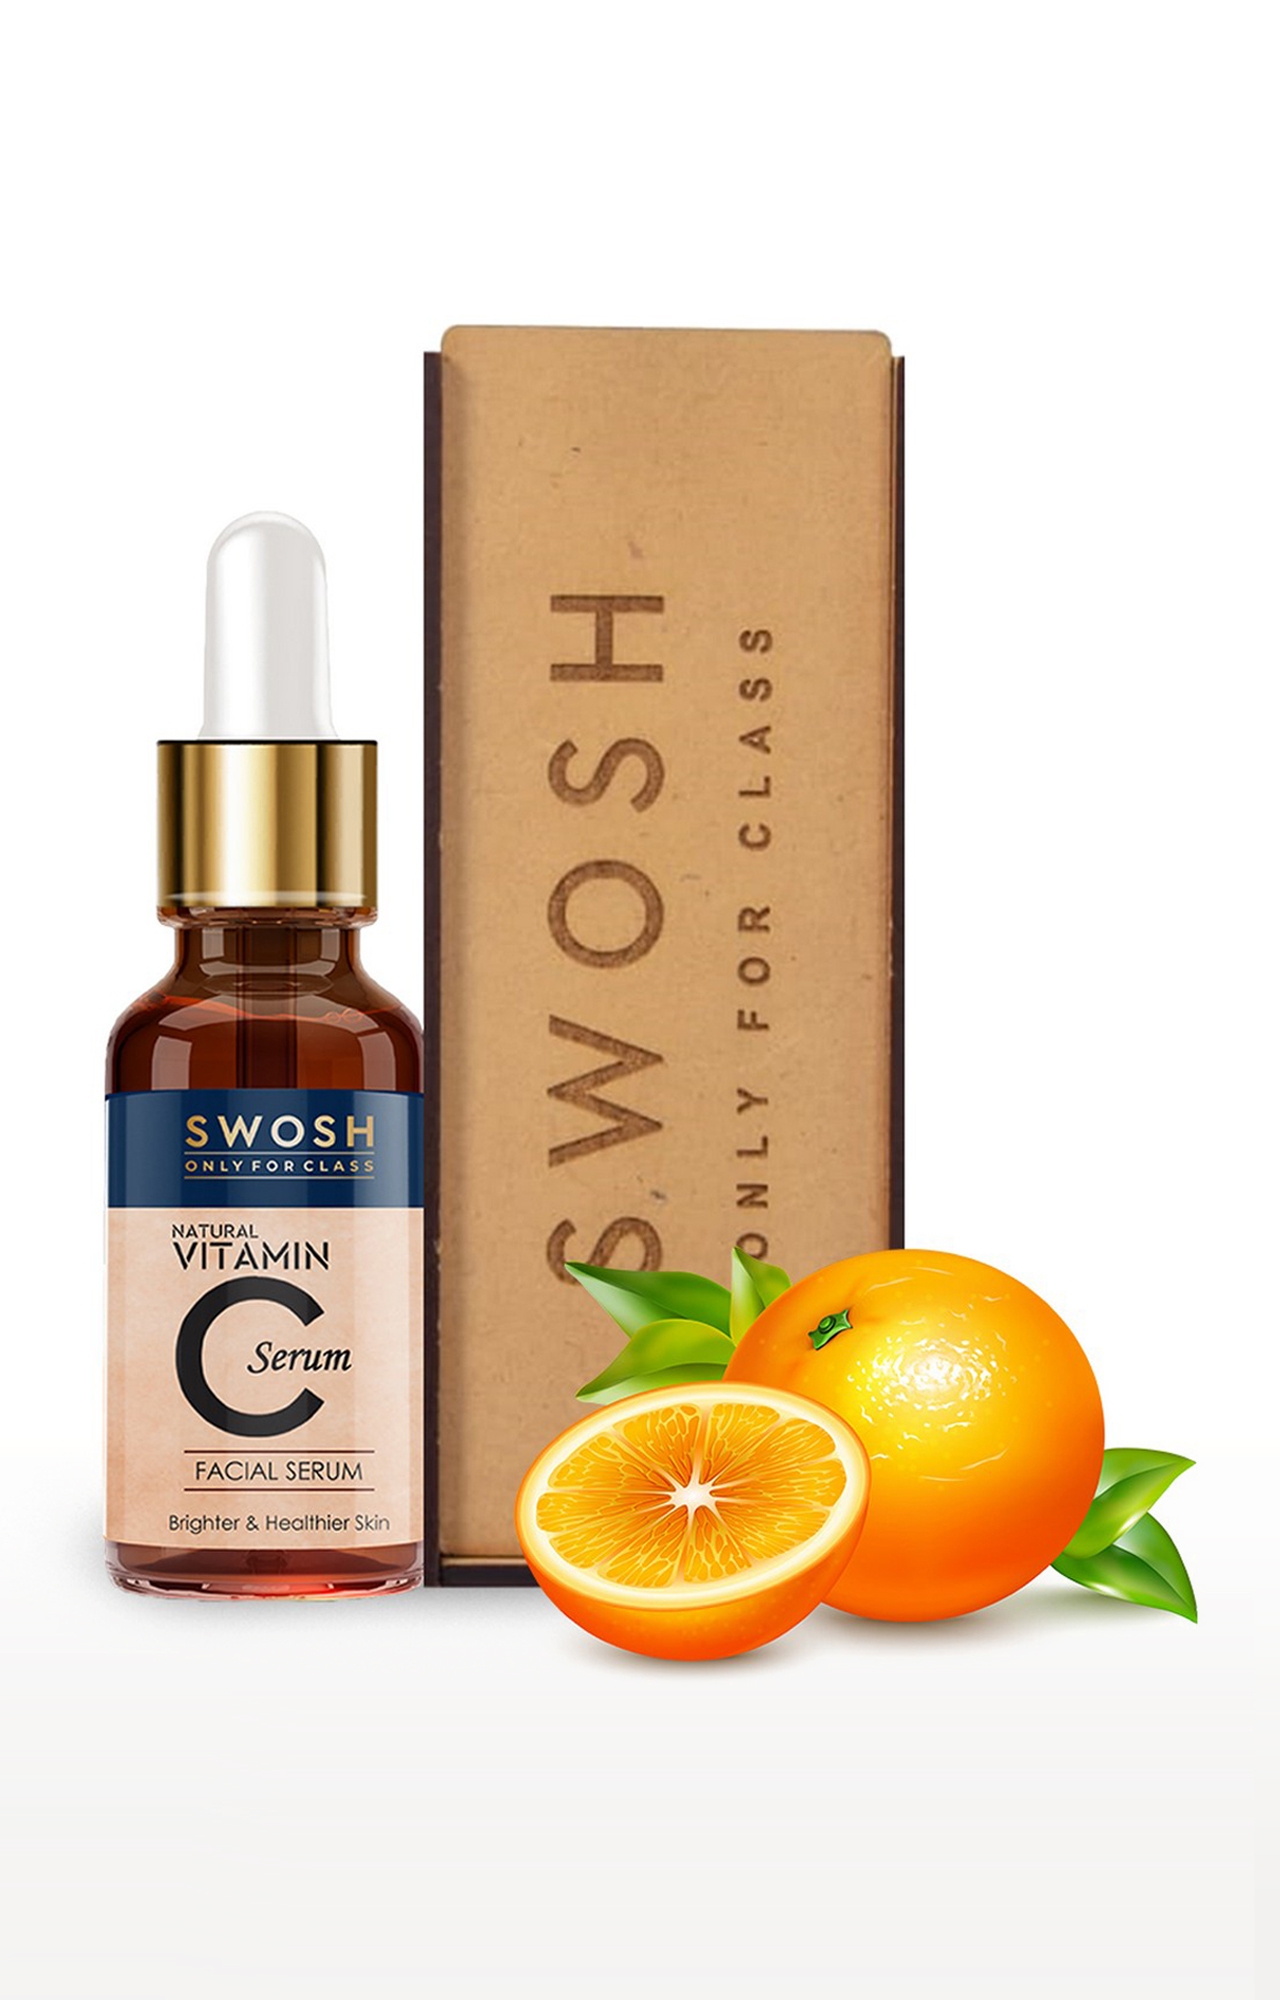 Swosh Vitamin C Serum For Face Enrich With Hyaluronic Acid, Vitamin E, Tamarind Extract, Aloe Vera Extract, Dead Sea Salt For Brightening, Anti Ageing, Wrinkle Control, 30Ml